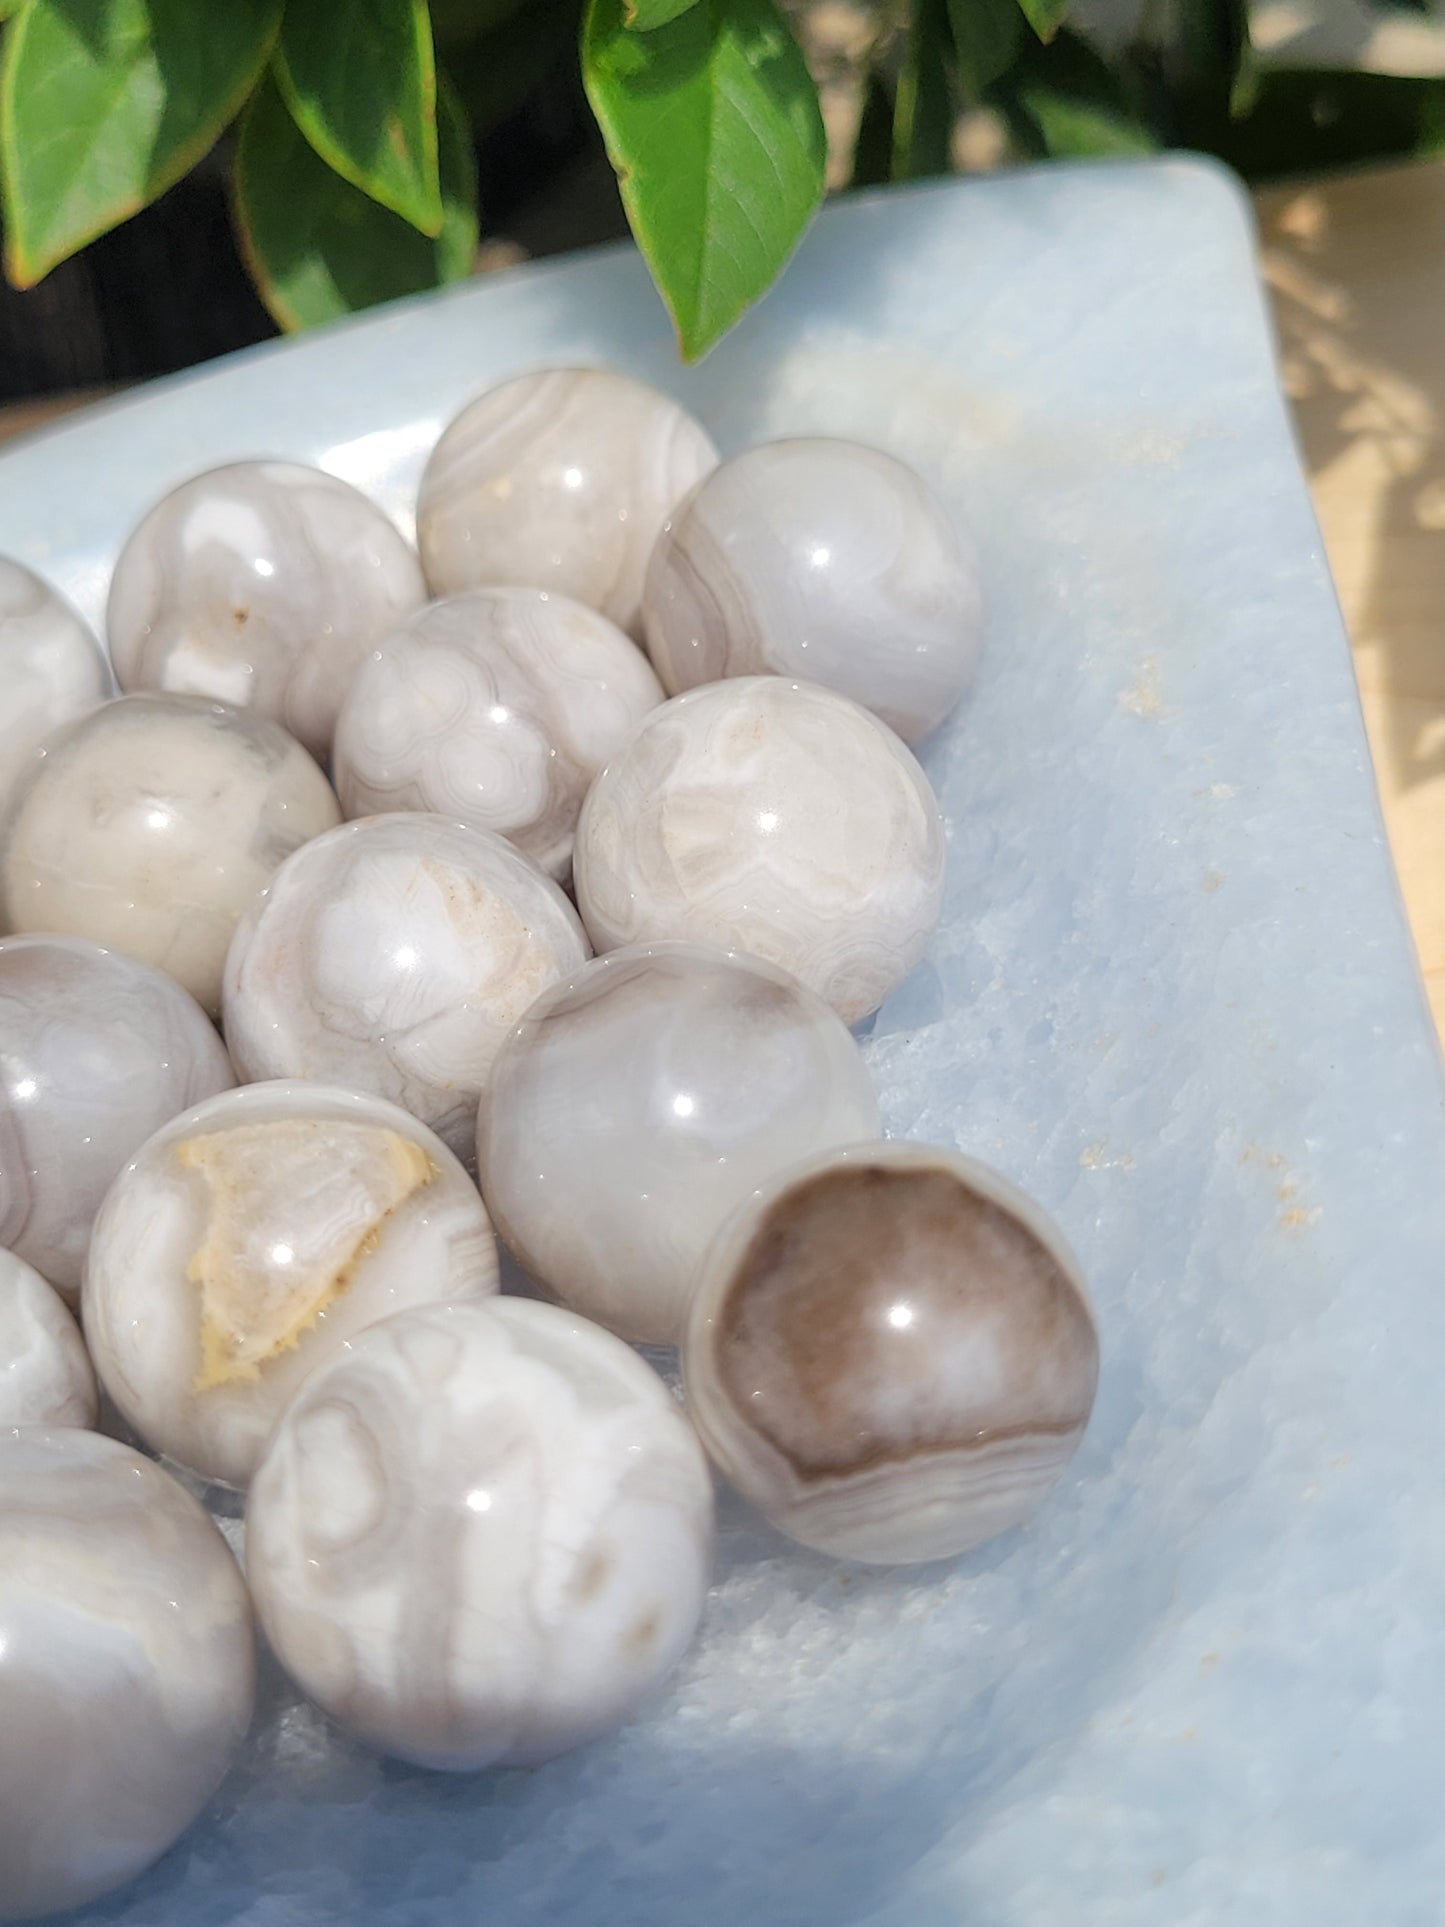 Small Grey Mexican Lace Agate Spheres